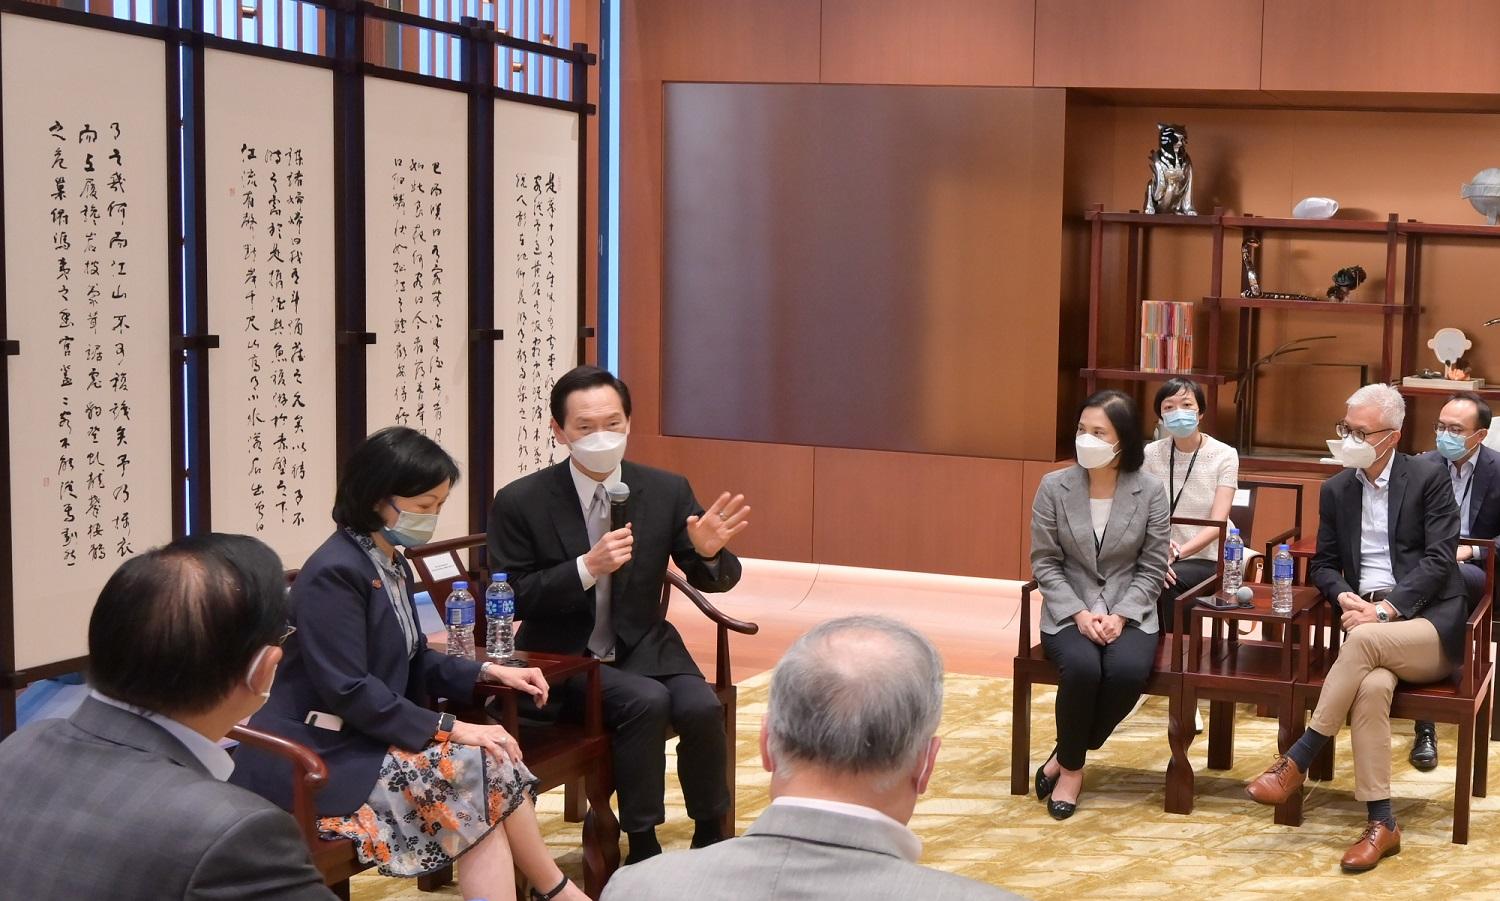 The Non-official Members of the Executive Council (ExCo Non-official Members) today (July 20) visited the Hong Kong Palace Museum (HKPM) at the West Kowloon Cultural District. Photo shows the ExCo Non-official Members being briefed by the Chairman of the HKPM Board, Mr Bernard Chan (third left).